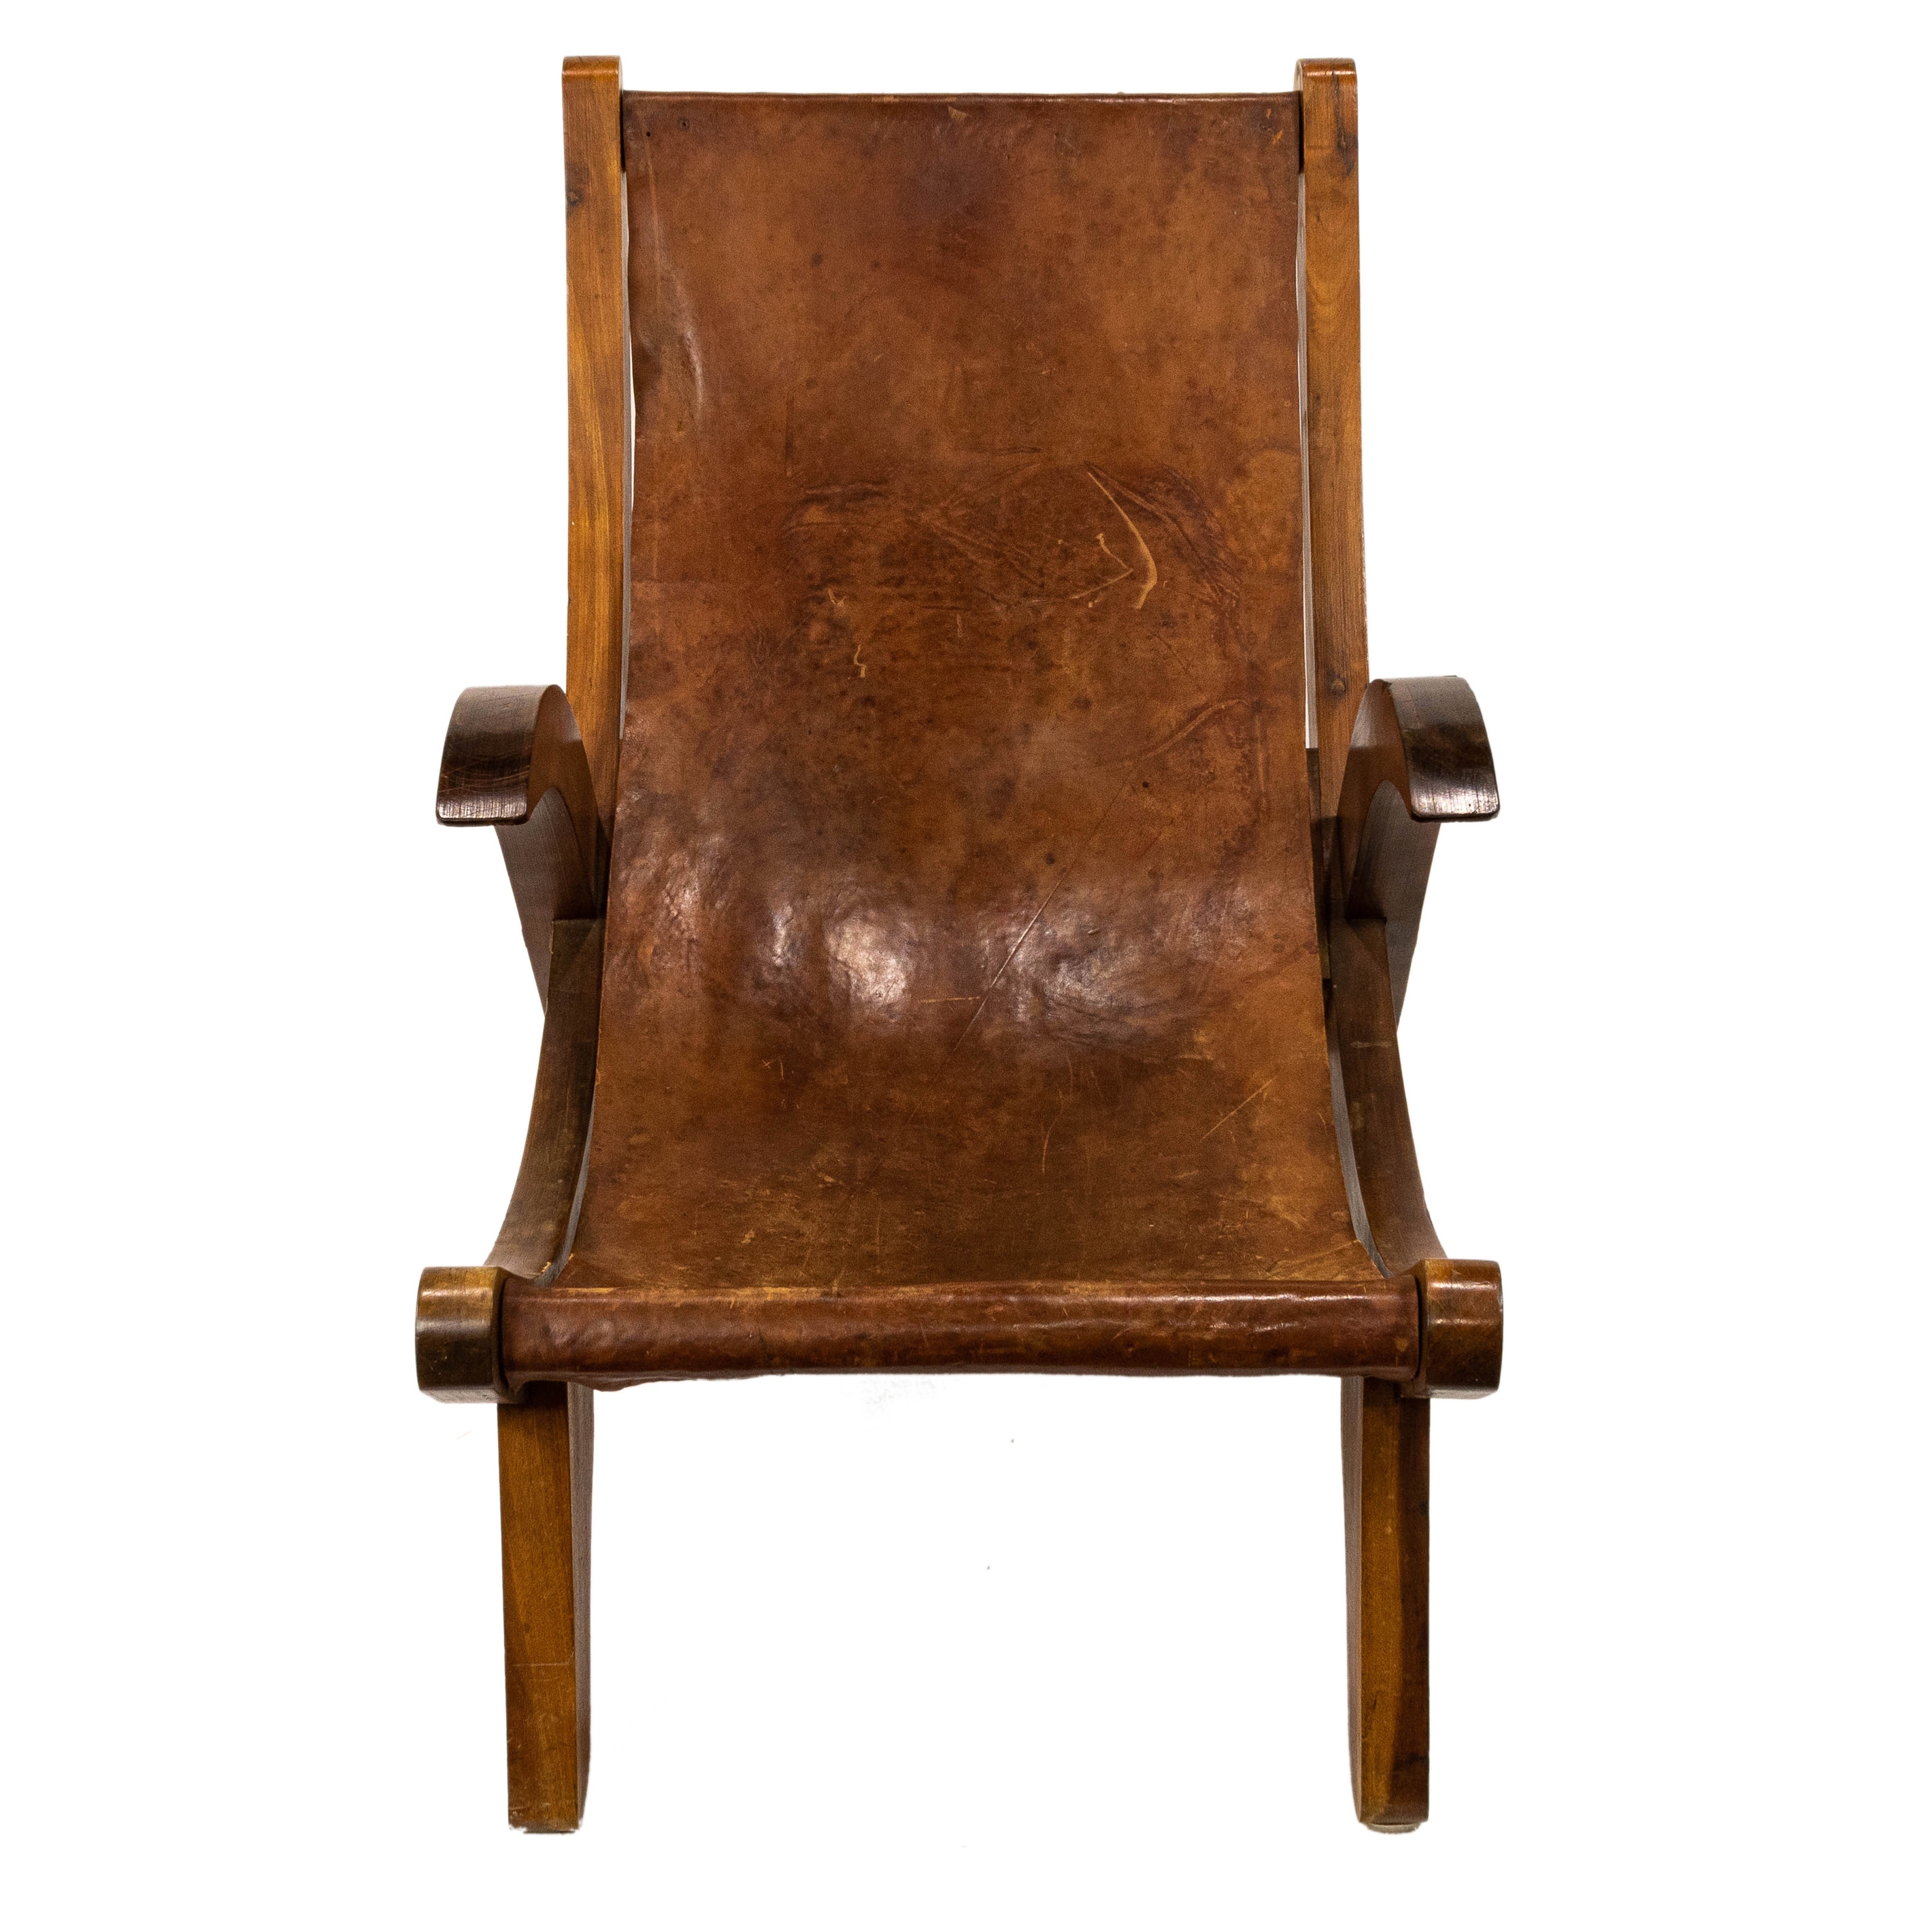 Artwork by Clara Porset, Butaque chair, Made of wood, leather